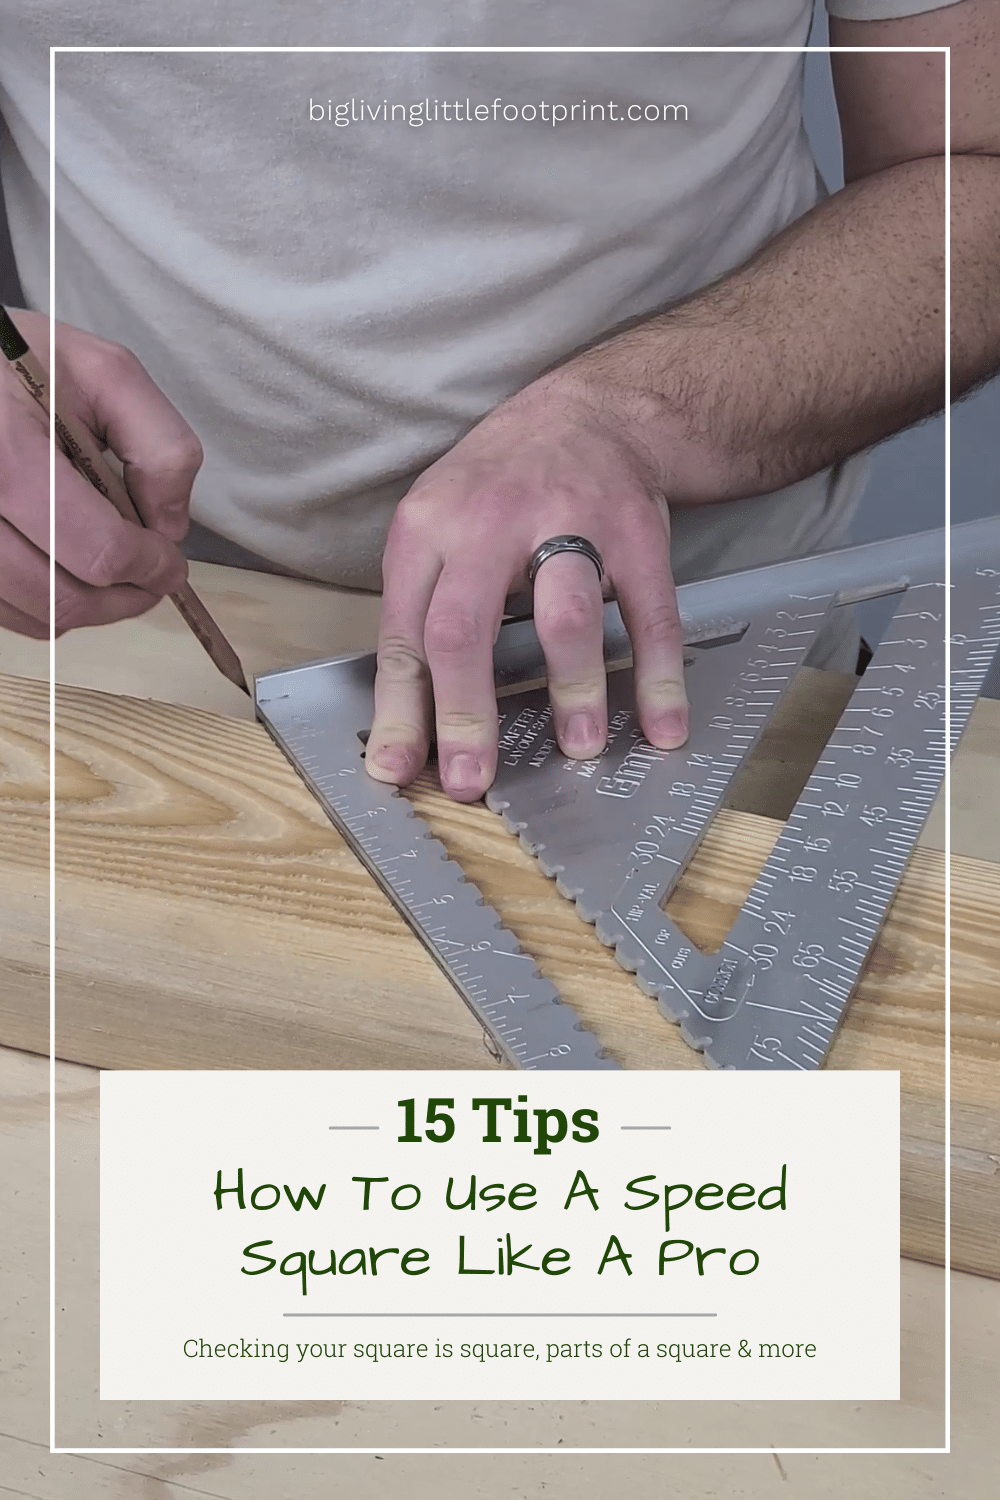 15 Tips On How to Use a Speed Square Like A Pro